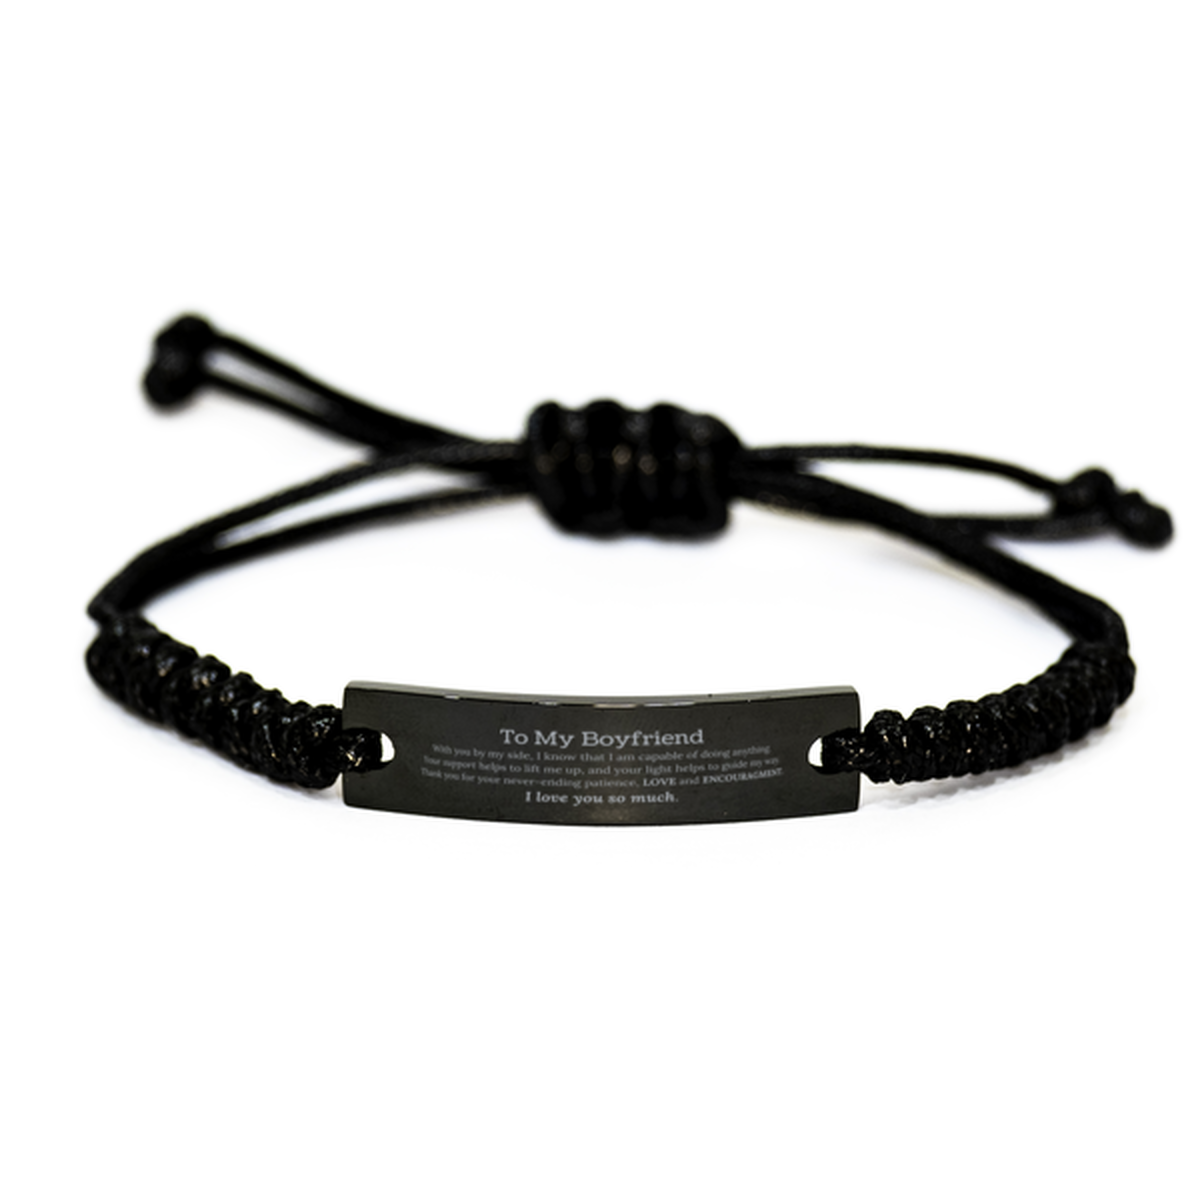 Appreciation Boyfriend Black Rope Bracelet Gifts, To My Boyfriend Birthday Christmas Wedding Keepsake Gifts for Boyfriend With you by my side, I know that I am capable of doing anything. I love you so much